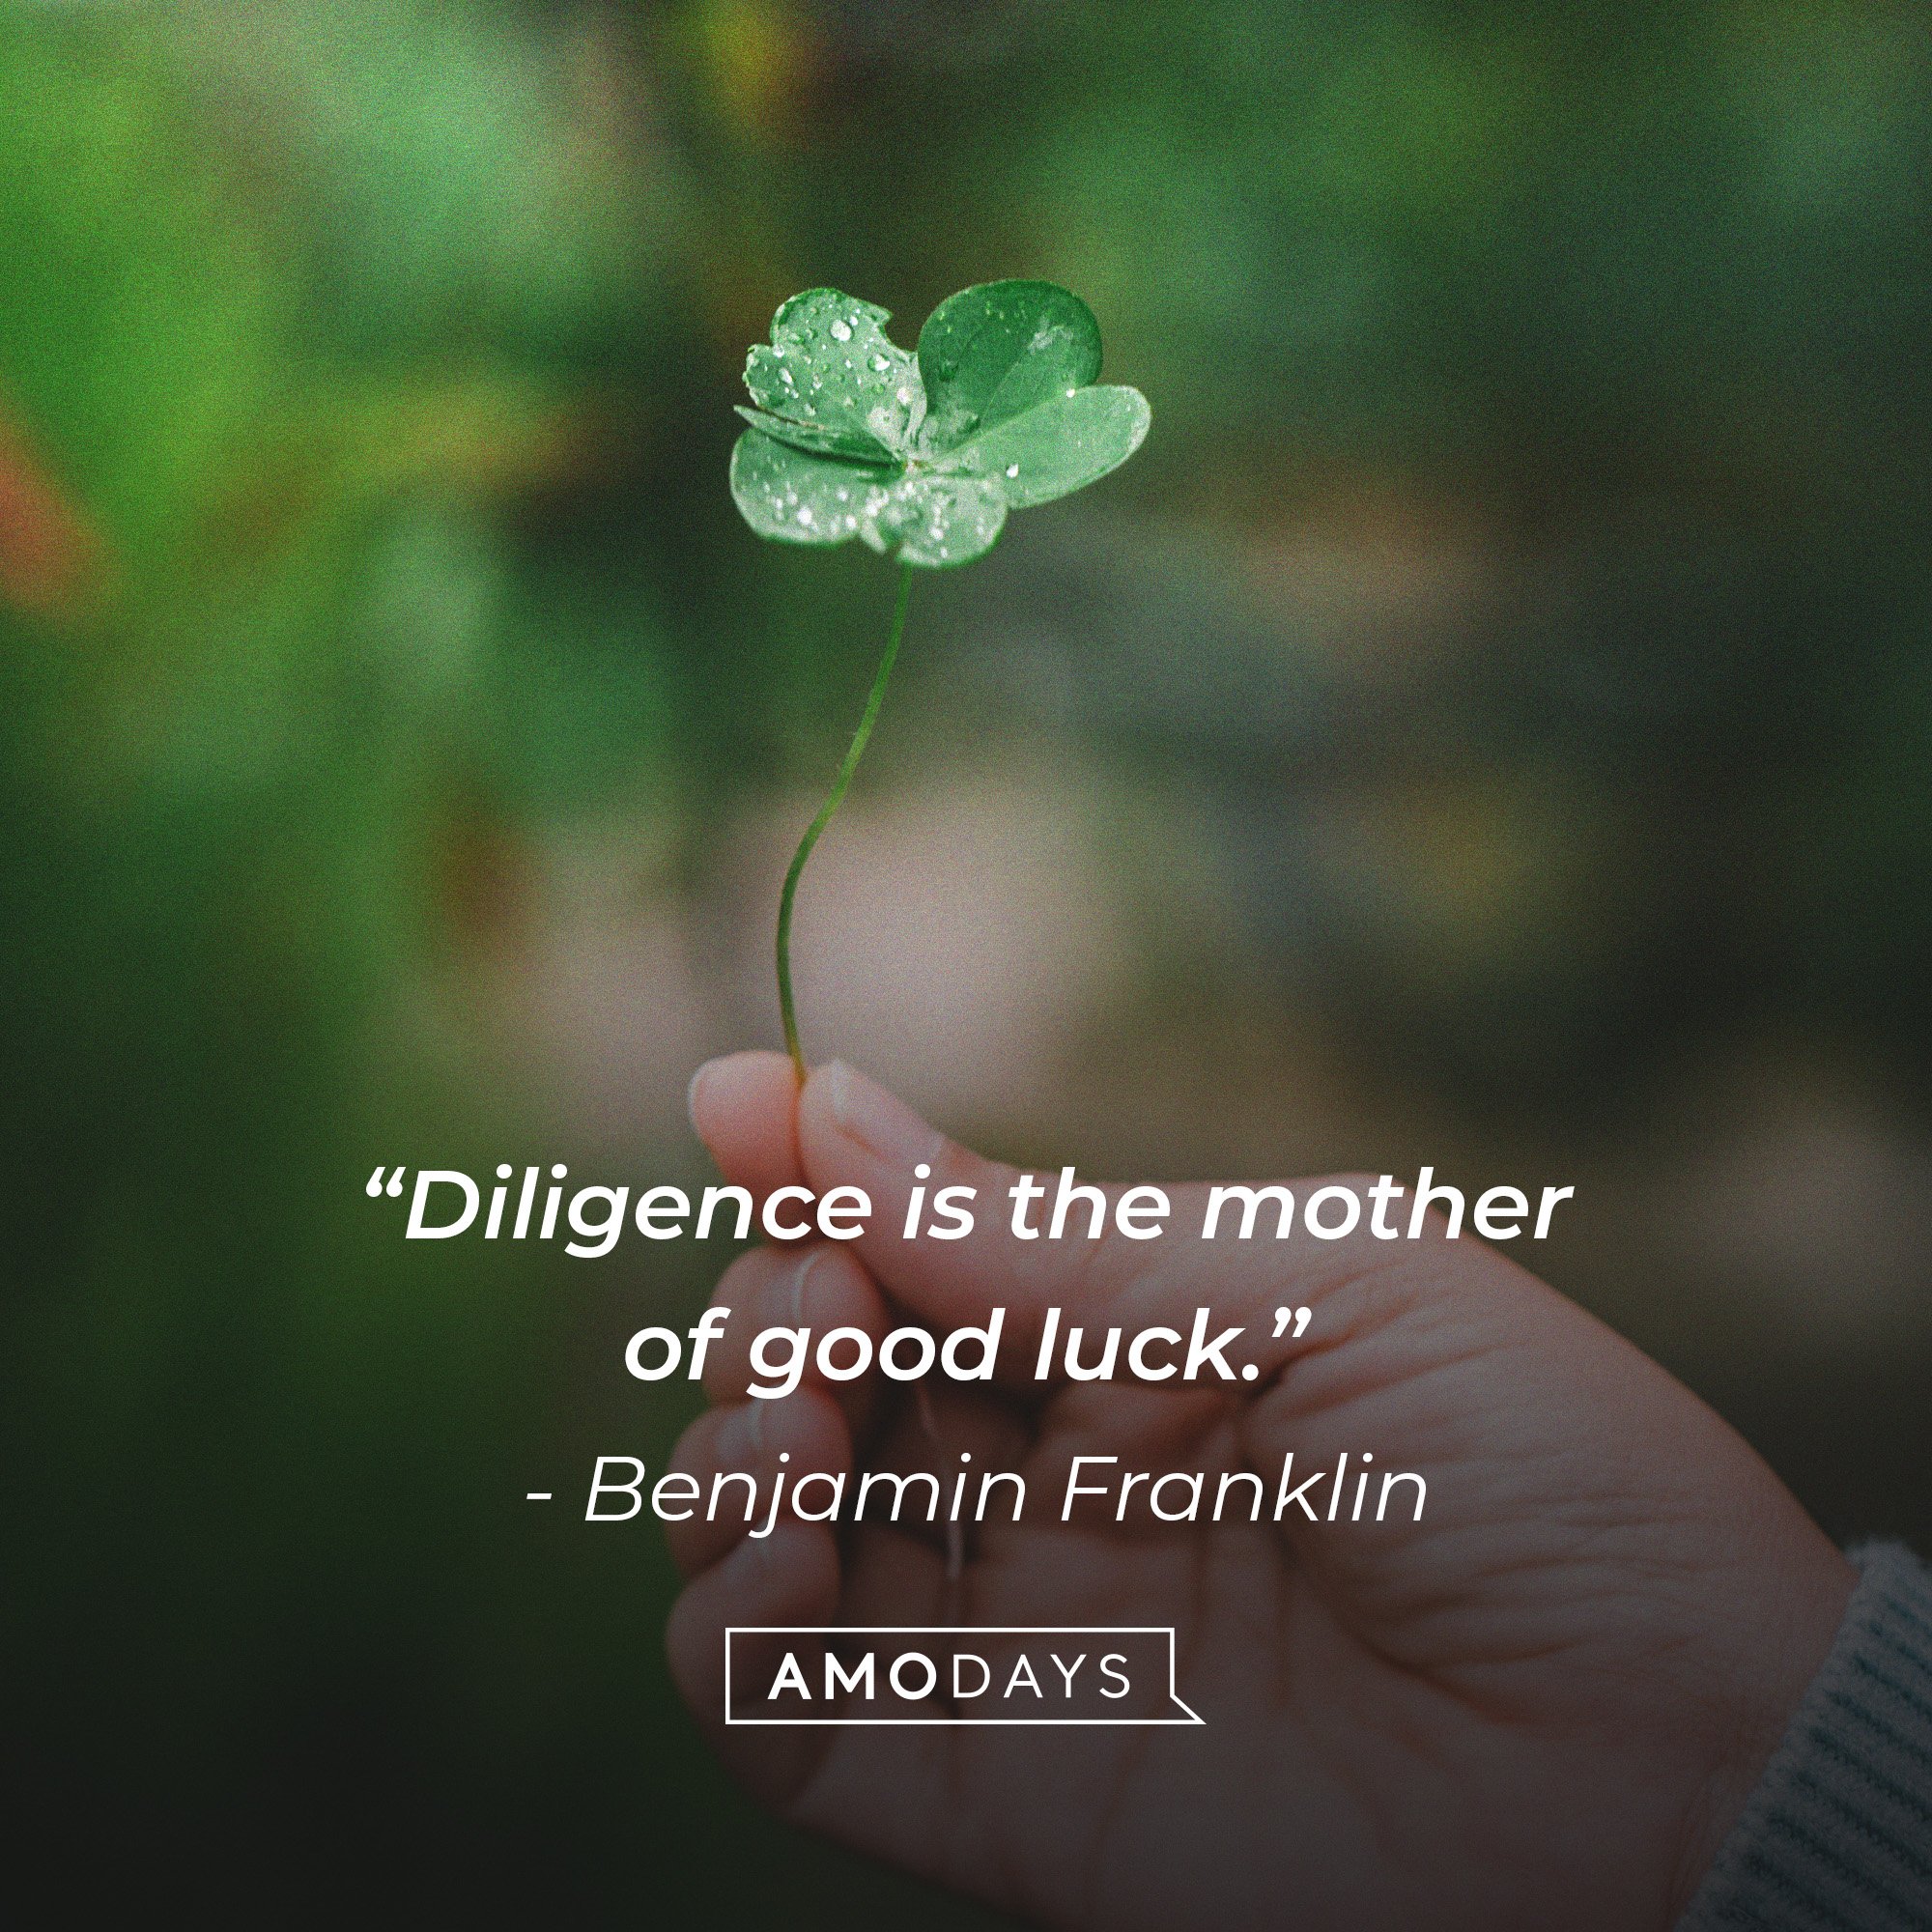 Benjamin Franklin's quote: “Diligence is the mother of good luck.” | Image: AmoDays